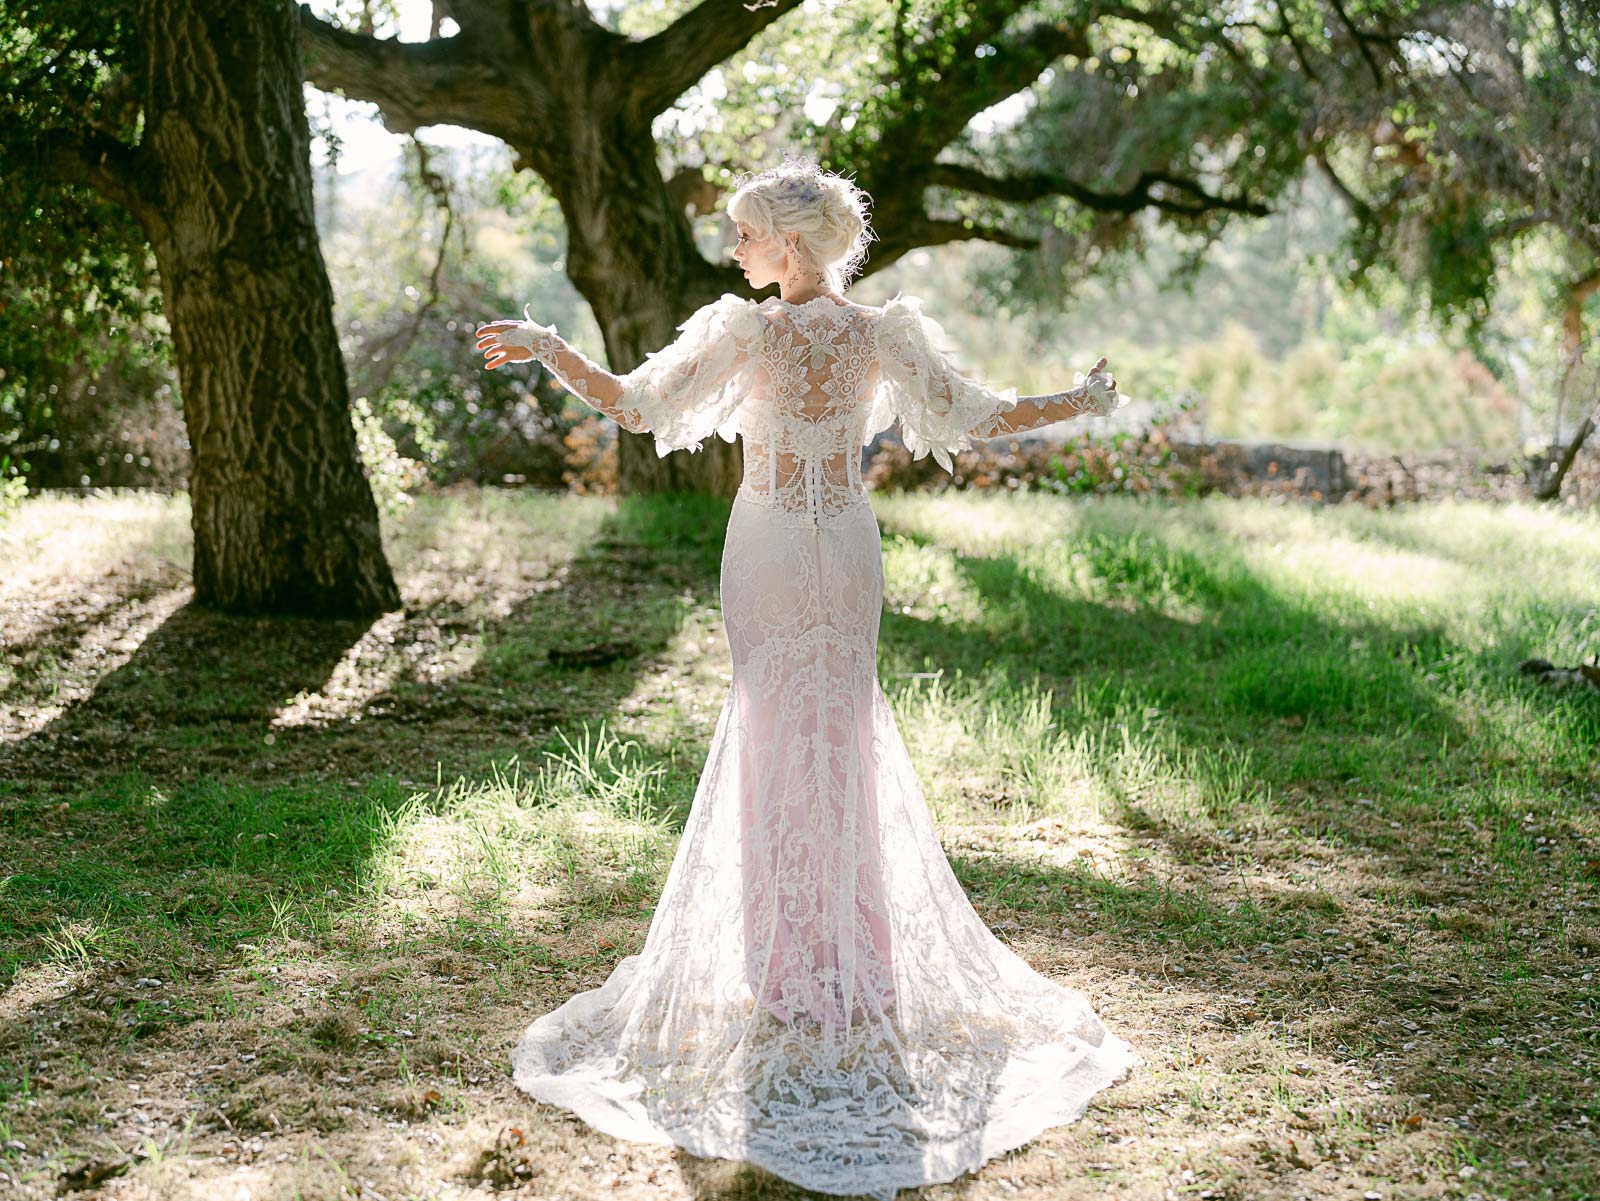 Quill Lace and Embroidery Wedding Dress worn with the Everglade Couture Wedding Bolero